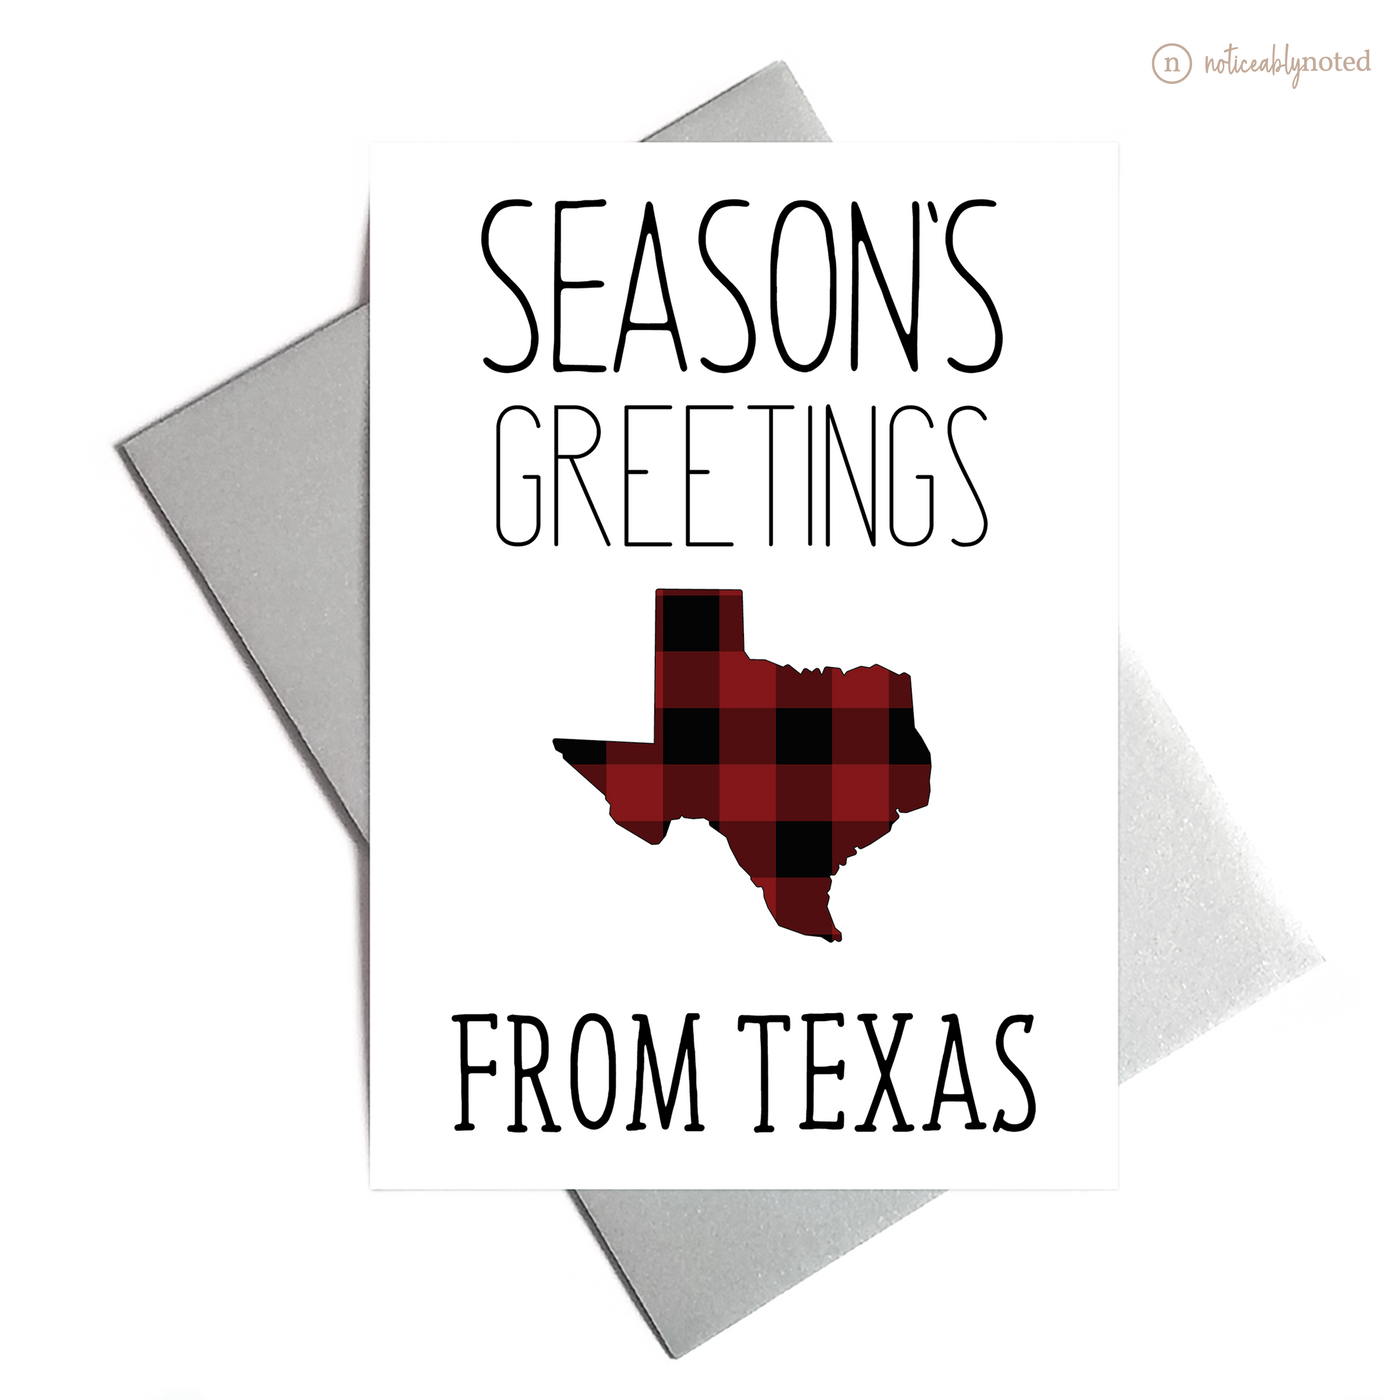 Texas Holiday Card - Season's Greetings | Noticeably Noted